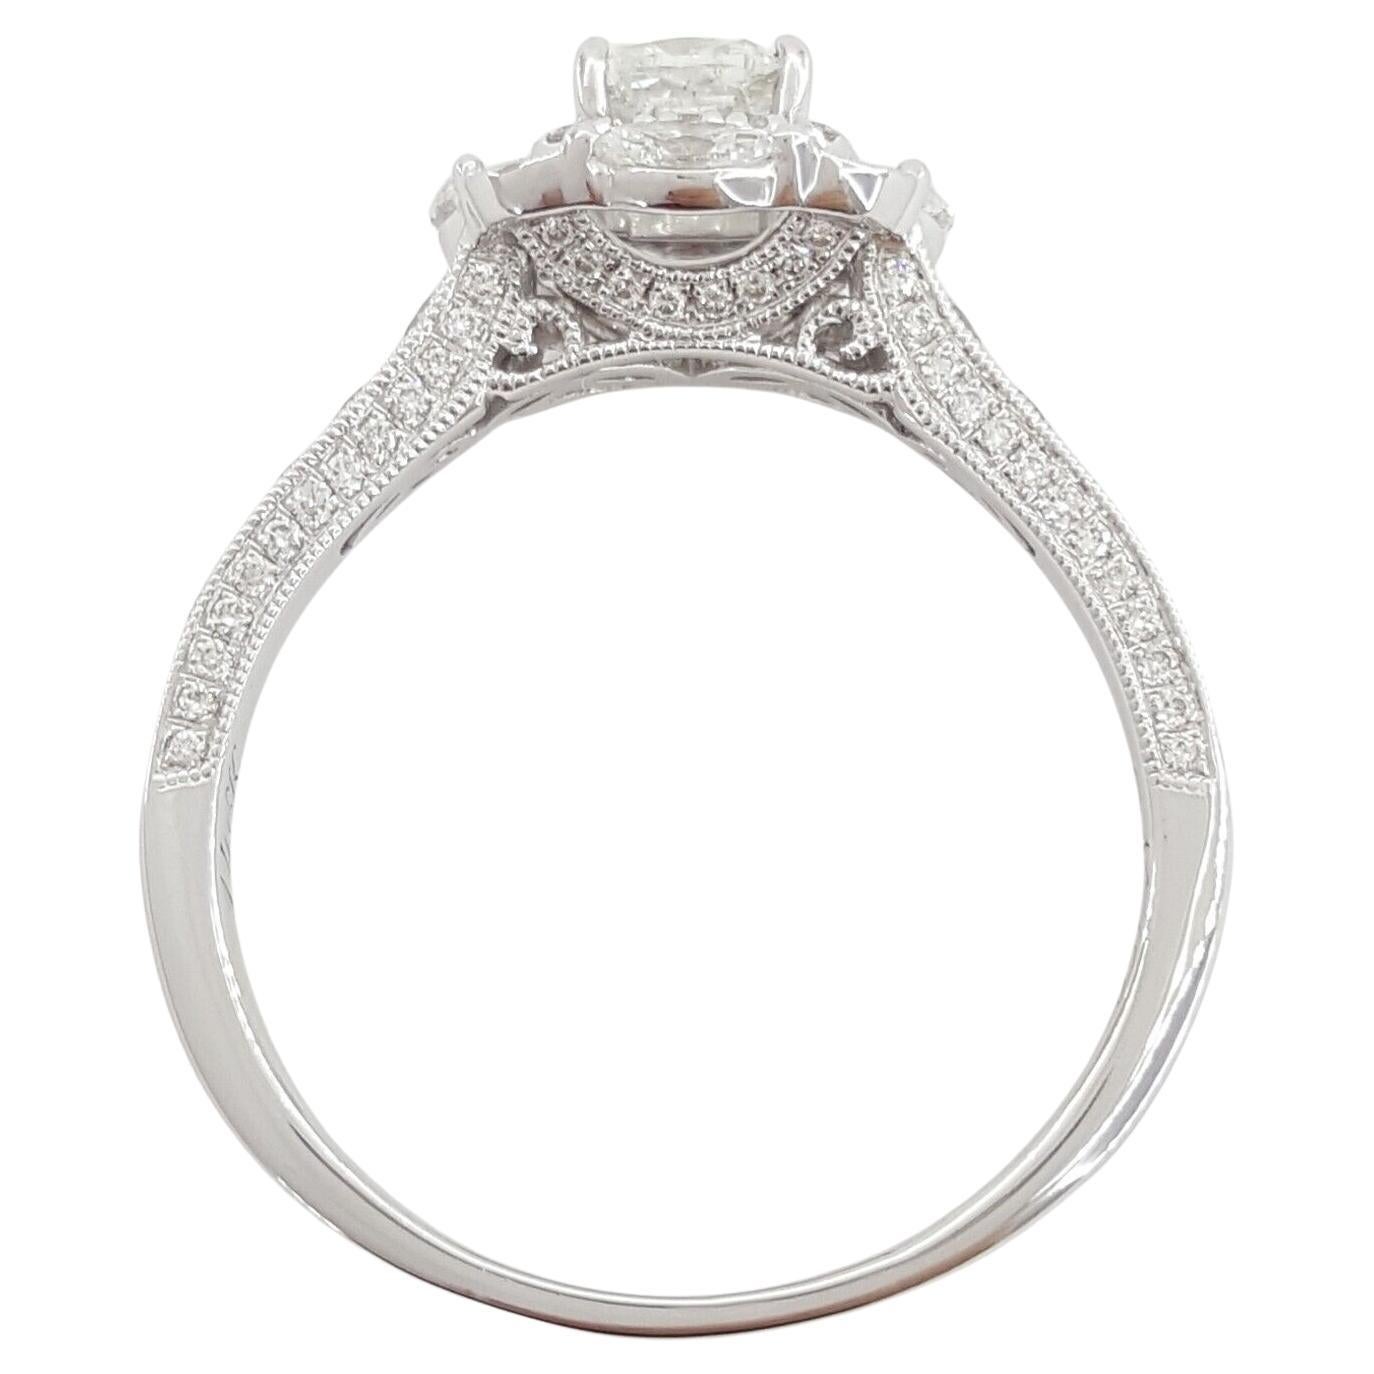 Neil Lane Bridal® presents a 1.75-carat total weight engagement ring featuring a Cushion Brilliant Cut diamond with a double halo setting in 14k White Gold. The overall weight of the ring is 3.9 grams, and it is sized at 10. The centerpiece is a